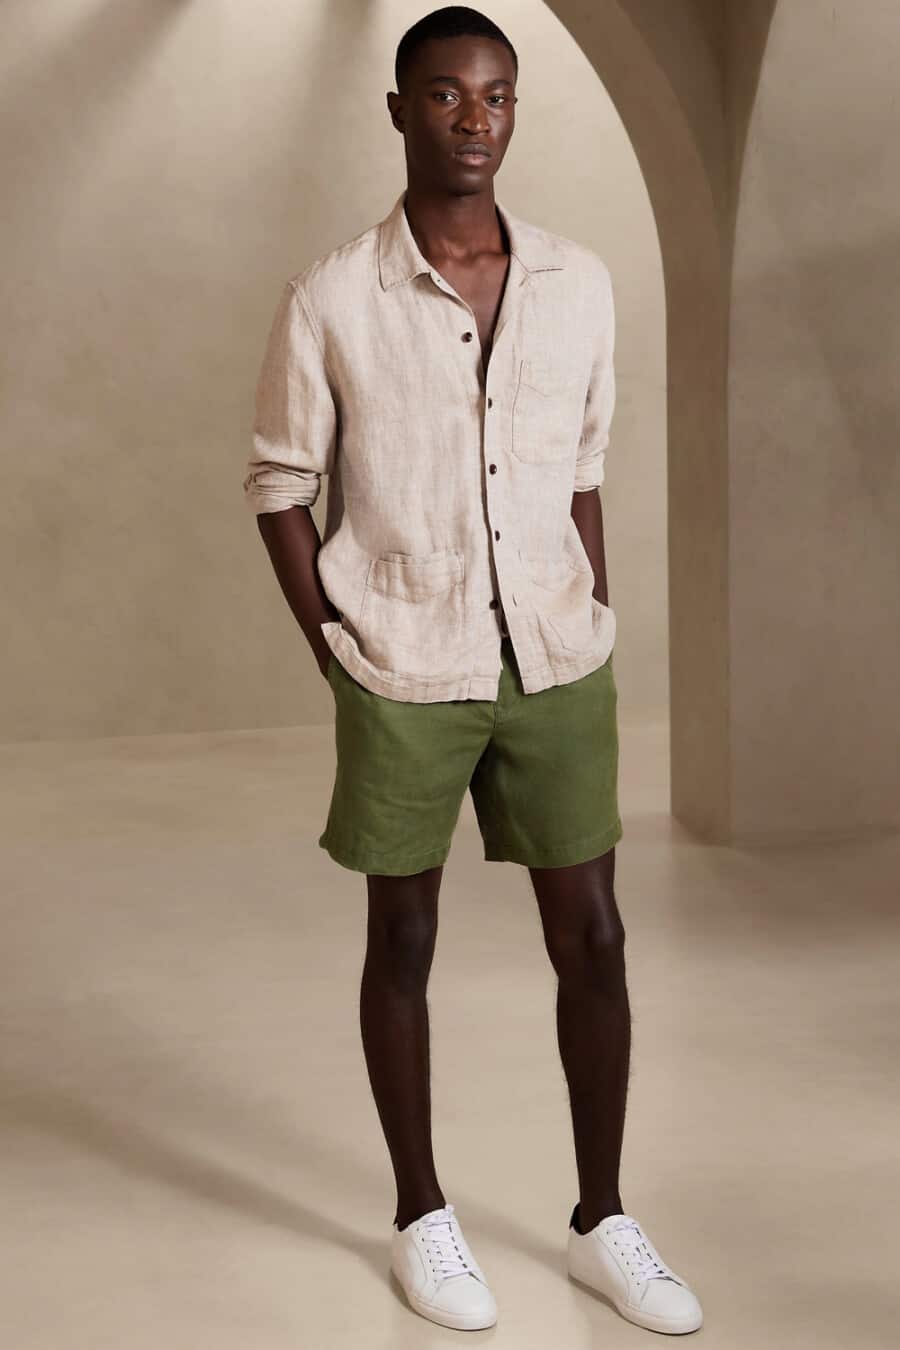 Men's green shorts, beige linen shirt and white sneakers outfit